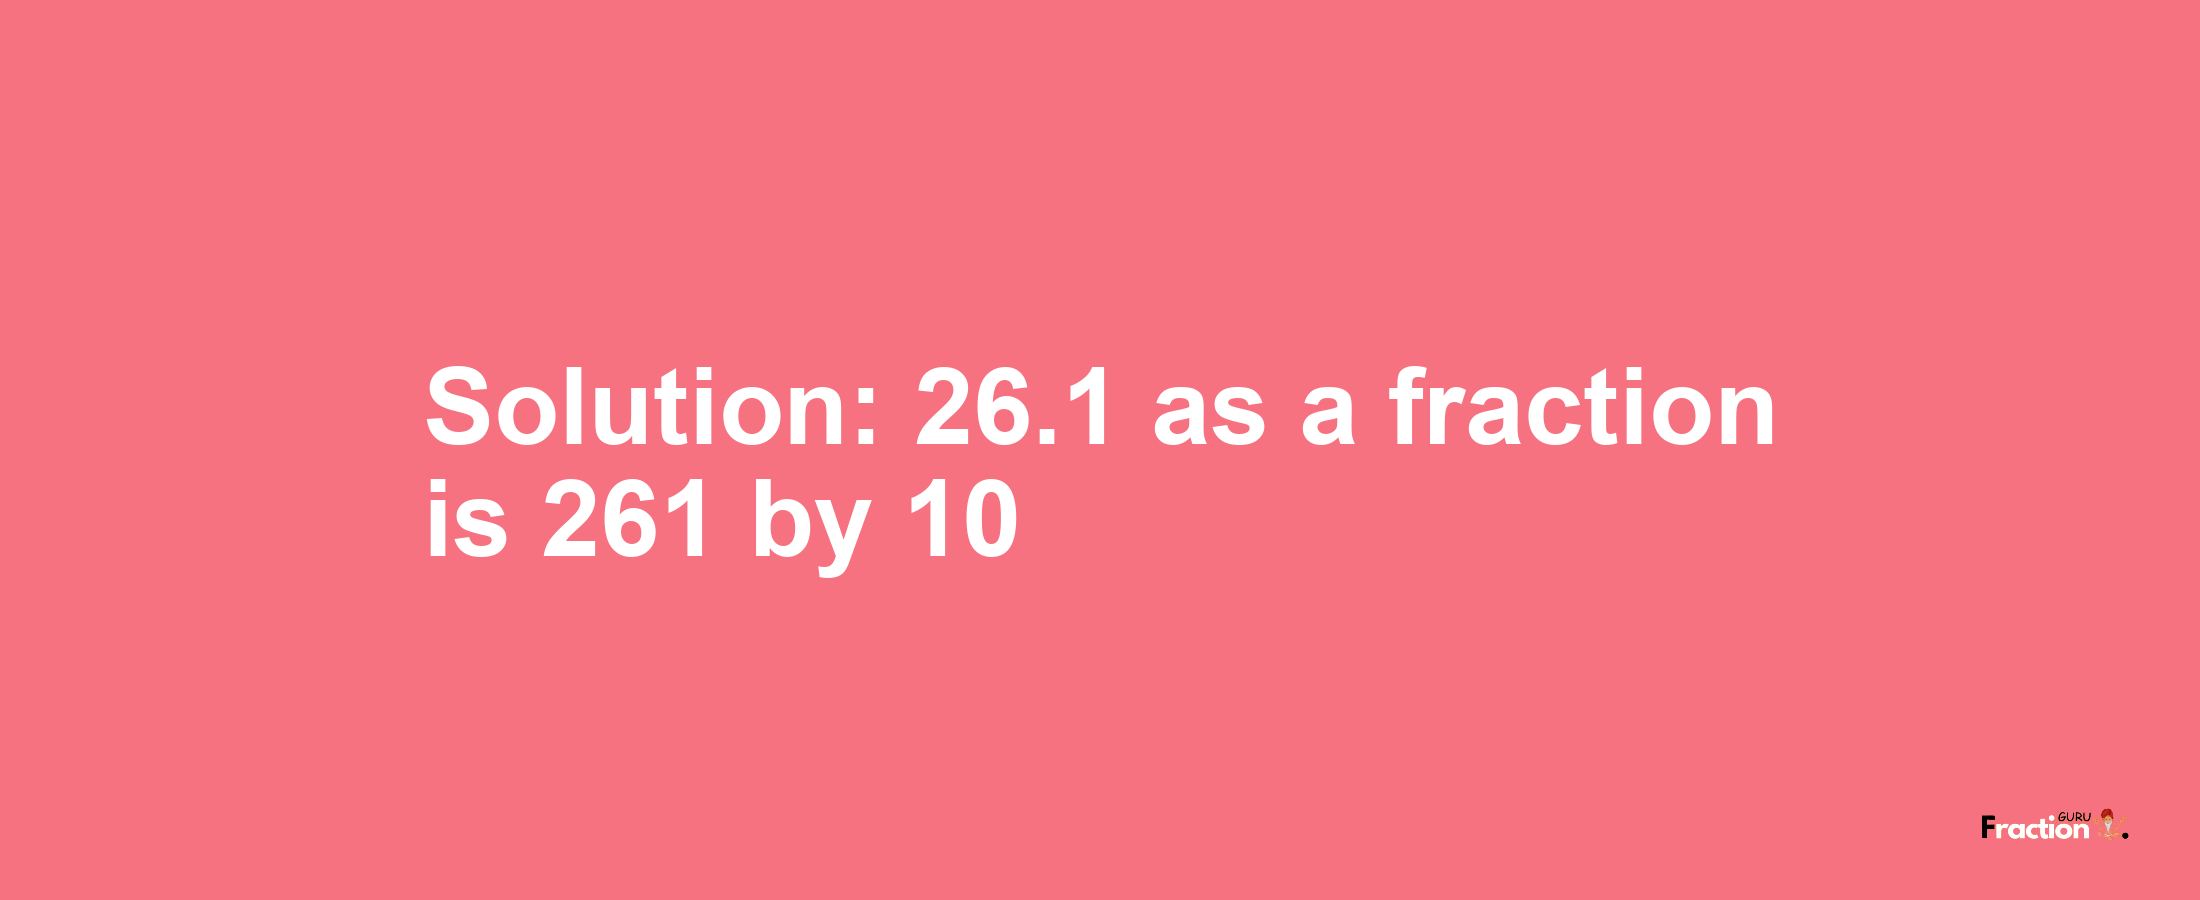 Solution:26.1 as a fraction is 261/10